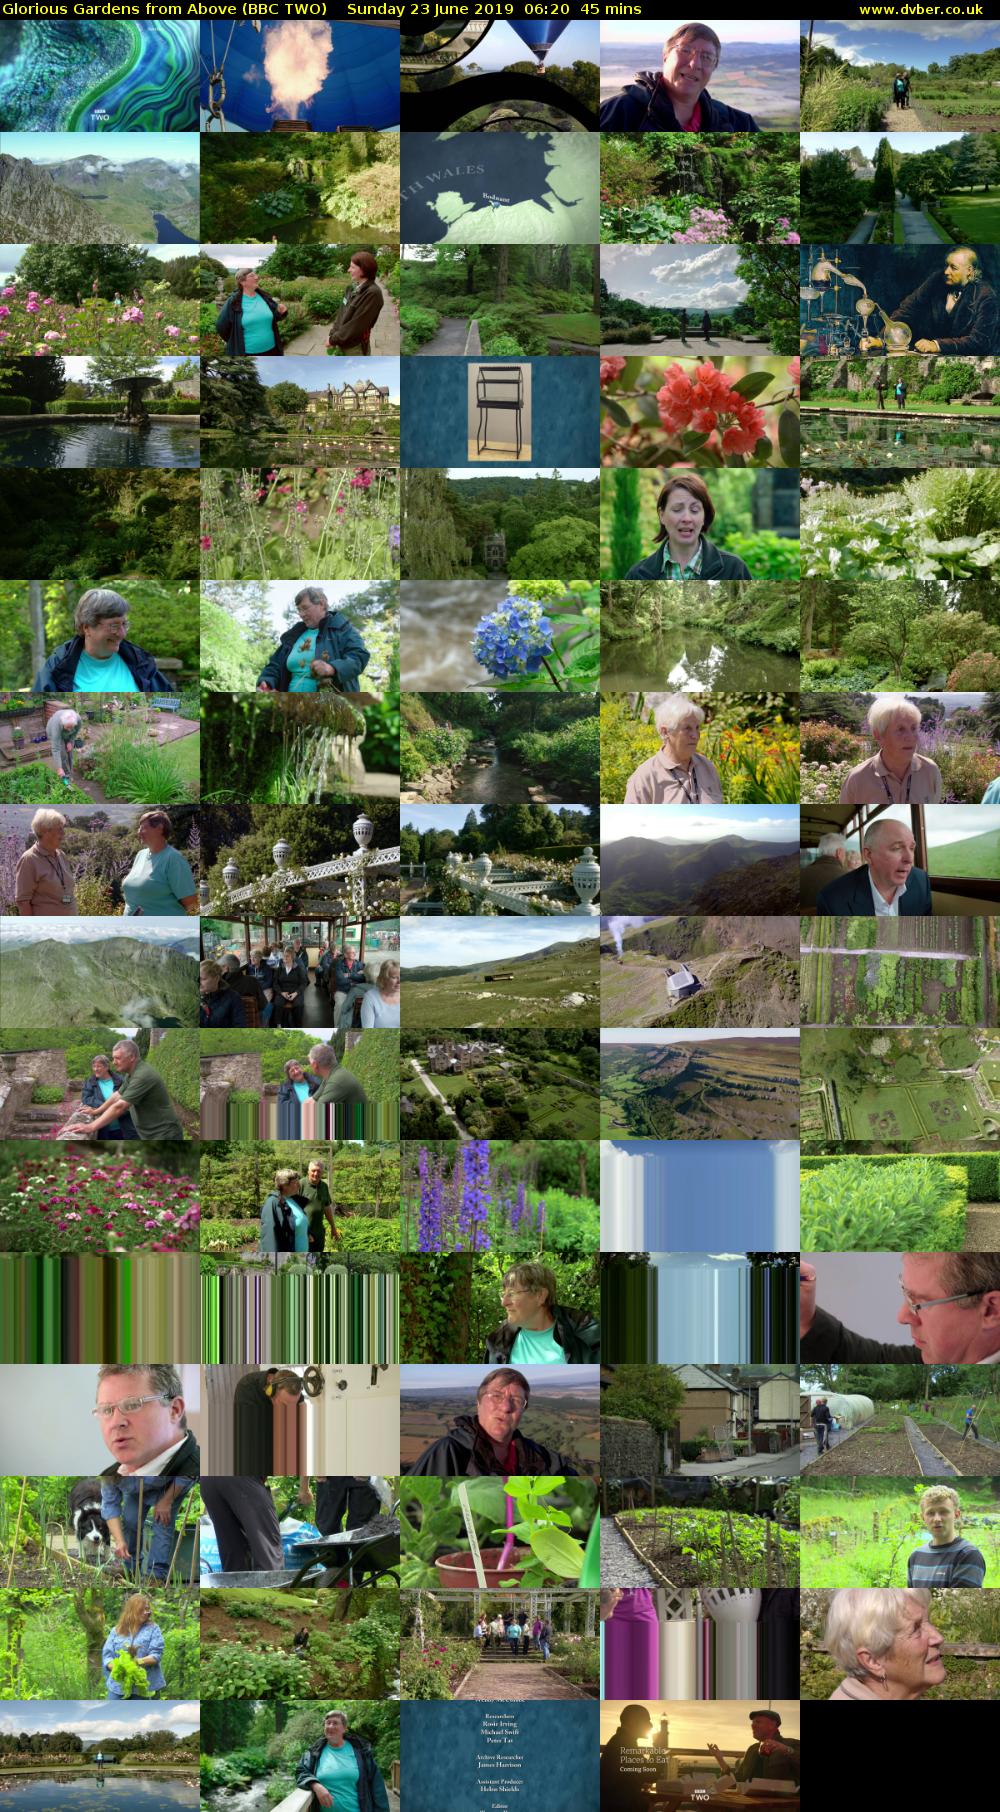 Glorious Gardens from Above (BBC TWO) Sunday 23 June 2019 06:20 - 07:05